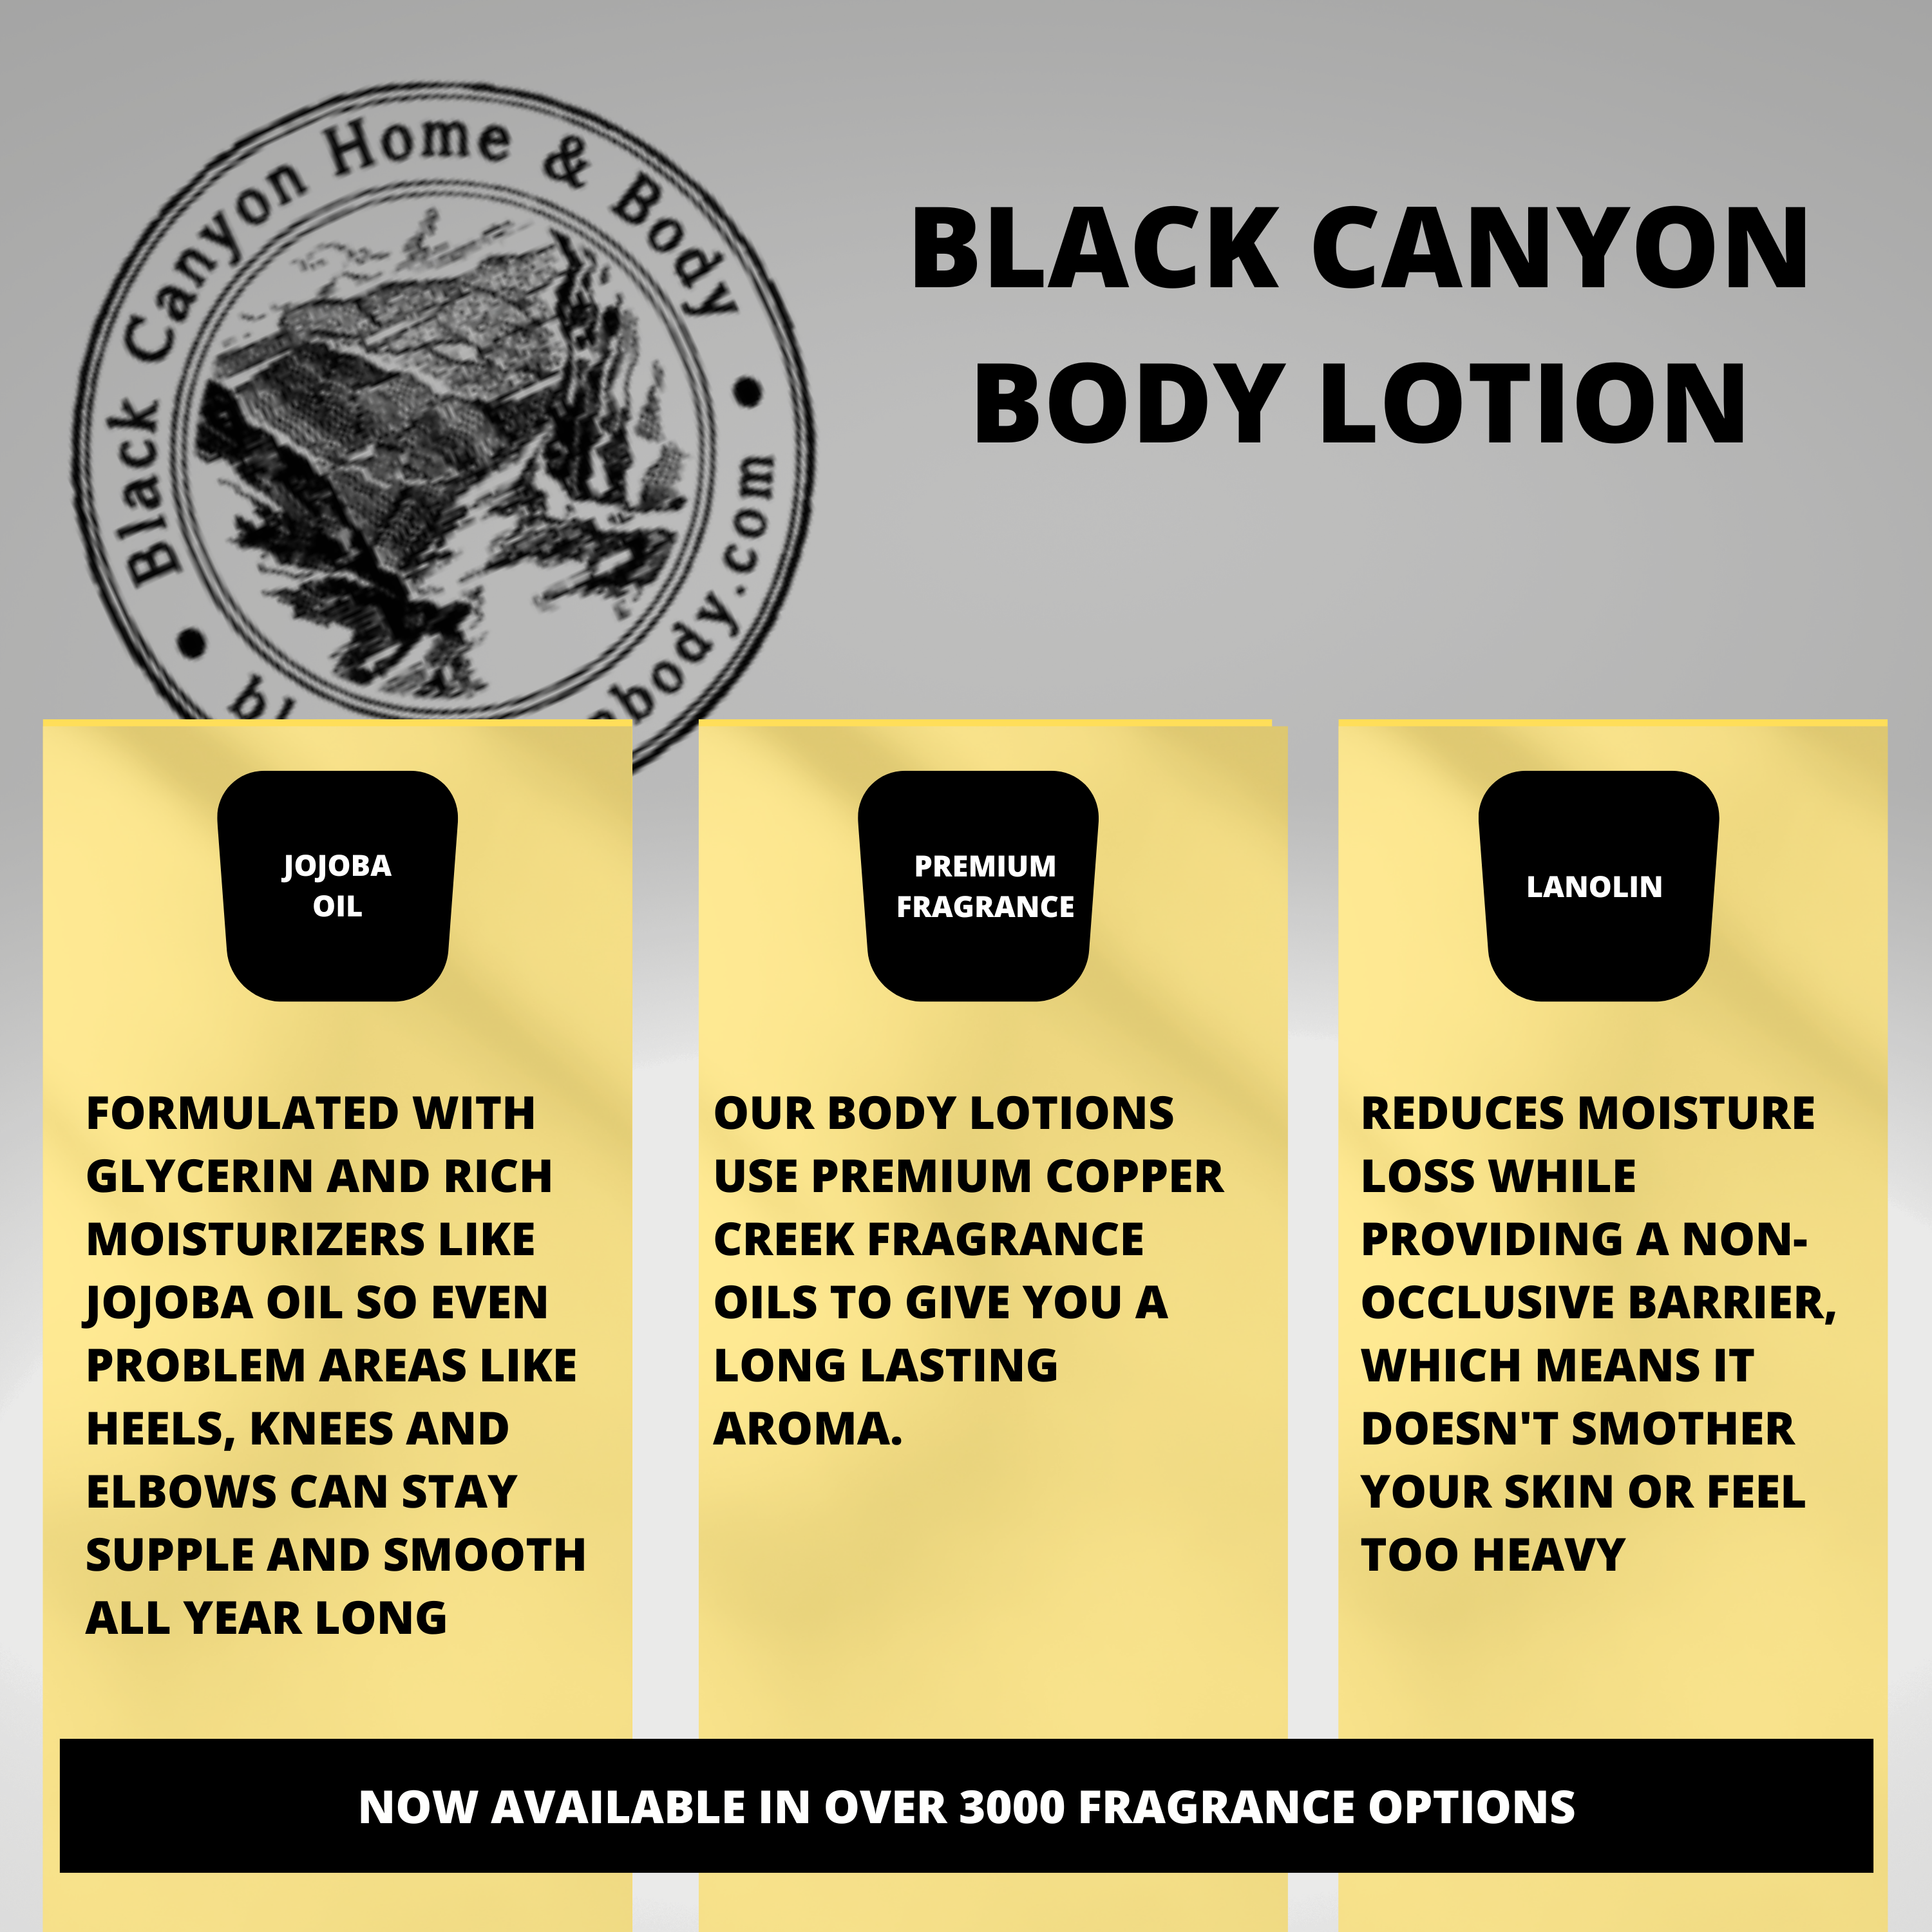 Black Canyon Lemongrass & Clove Scented Luxury Body Lotion with Lanolin and Jojoba Oil